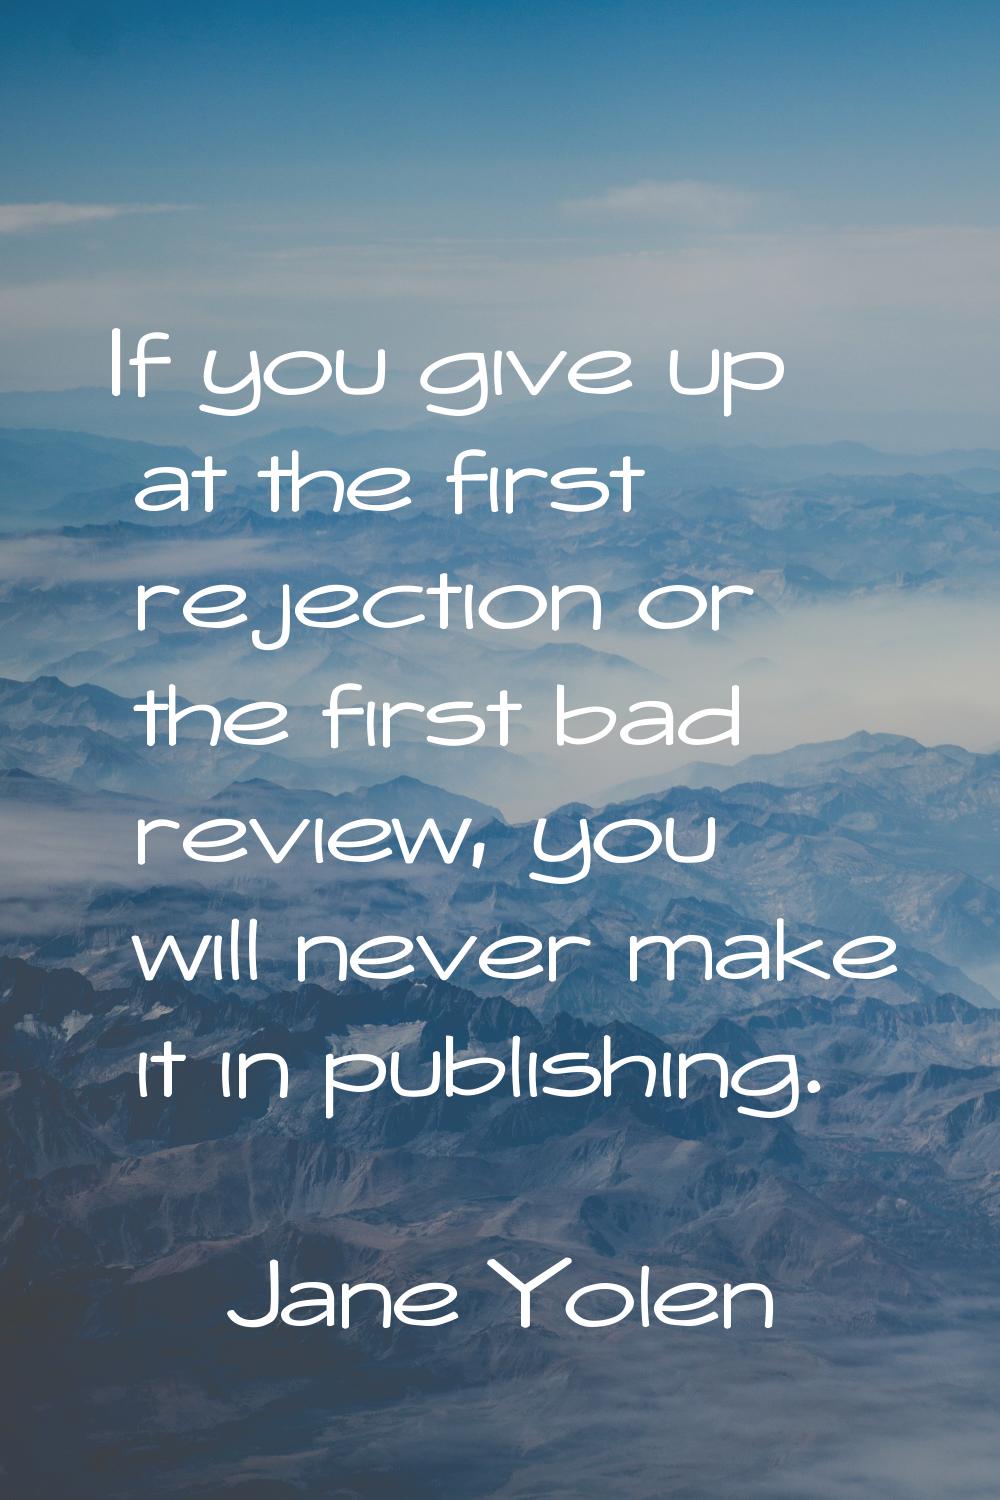 If you give up at the first rejection or the first bad review, you will never make it in publishing